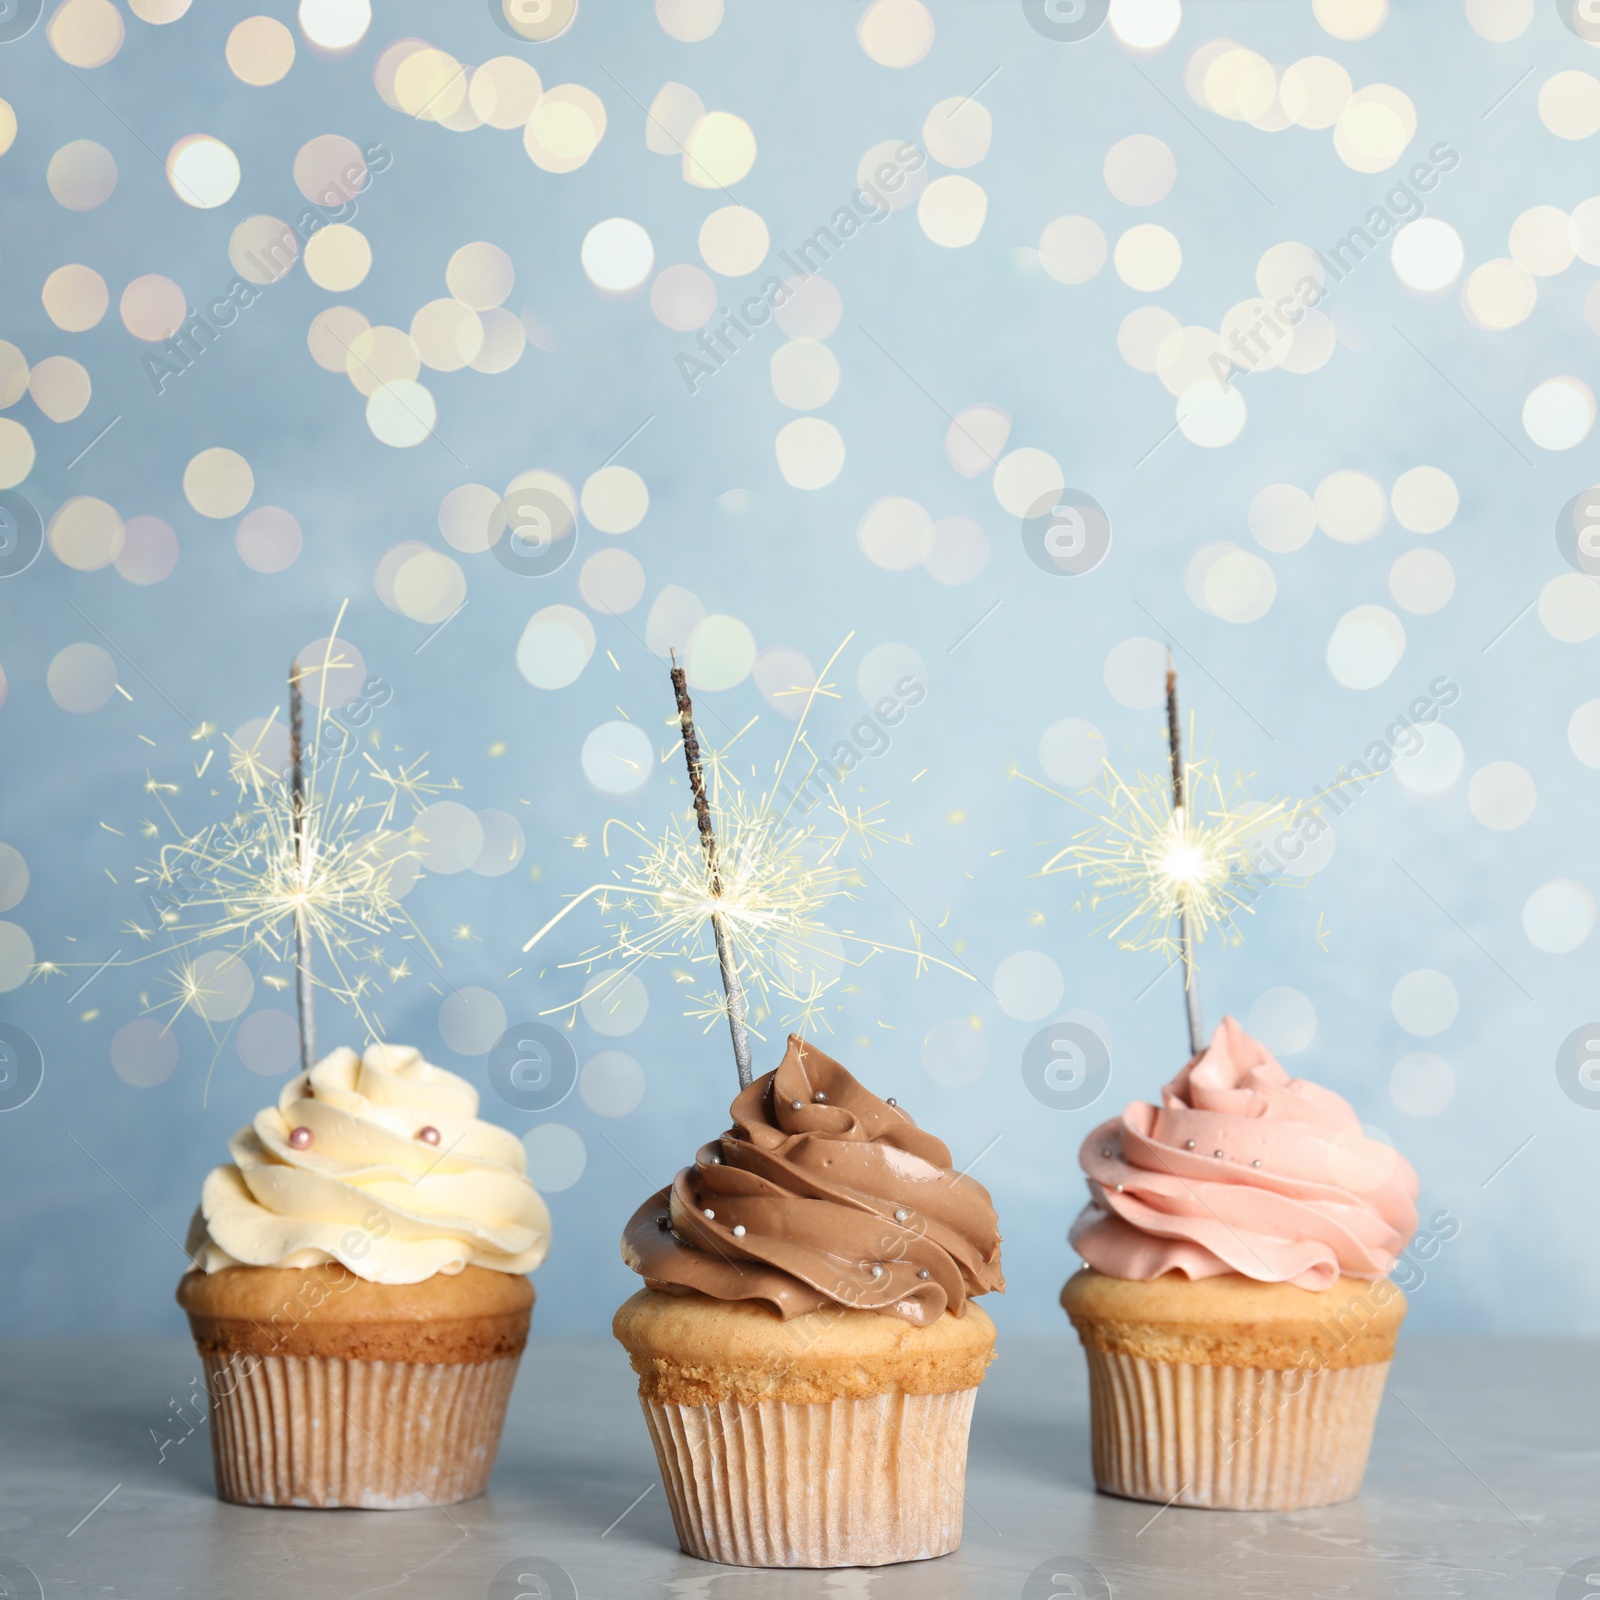 Image of Birthday cupcakes with sparklers on table against light blue background